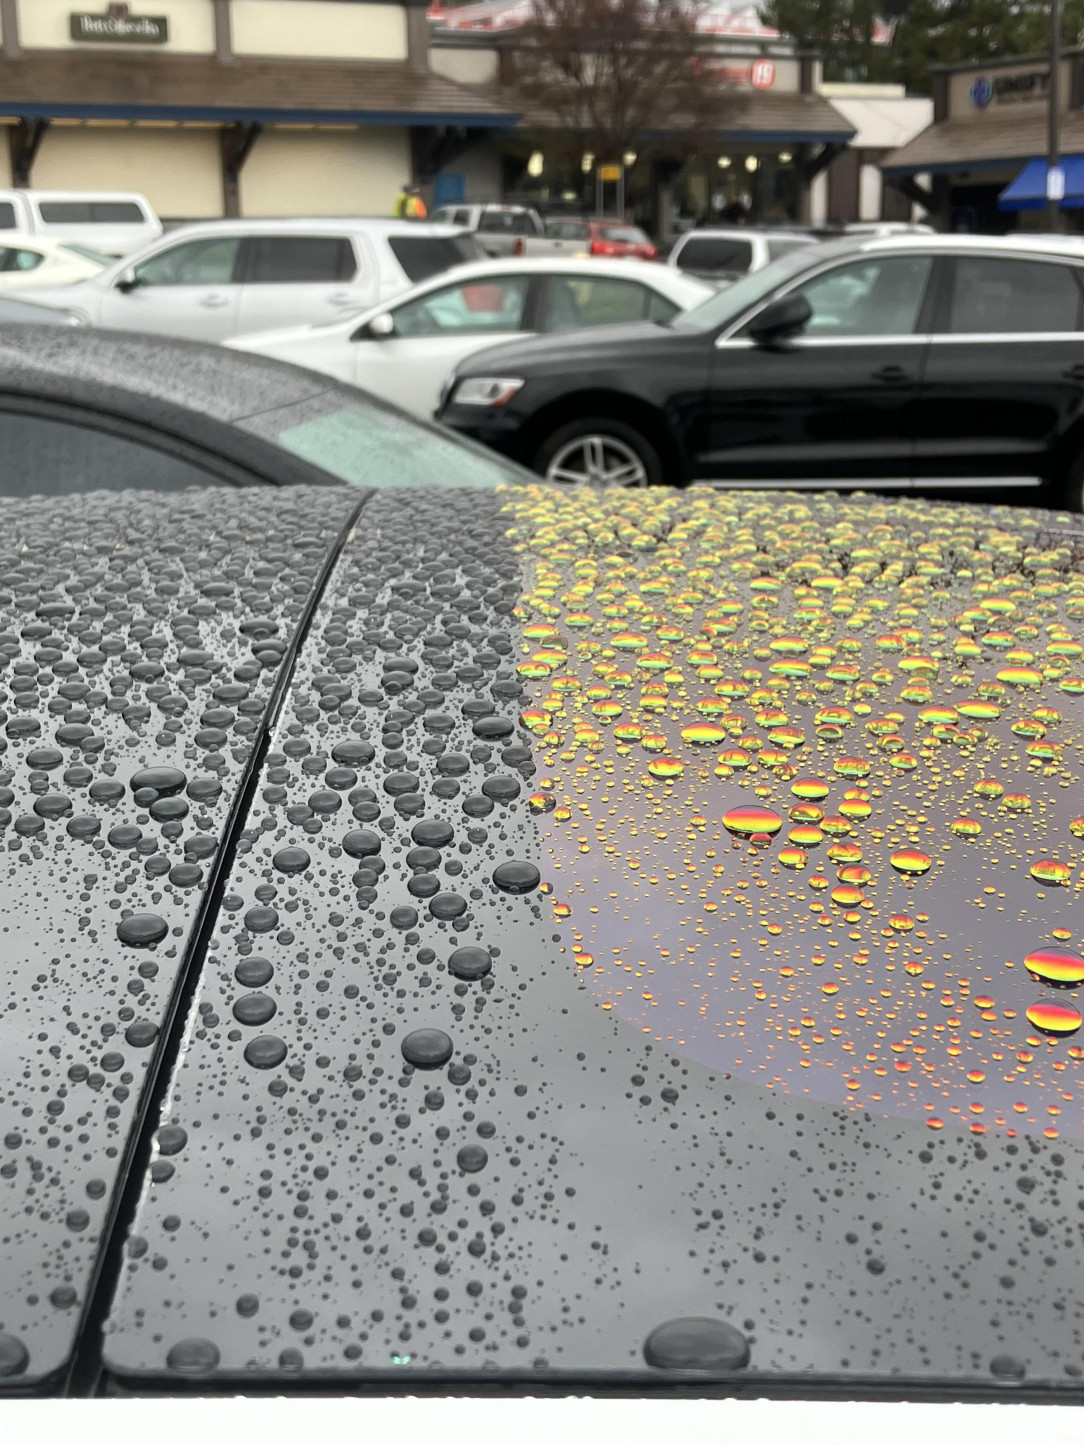 The rain droplets changing color on the roof of this car. So pretty!